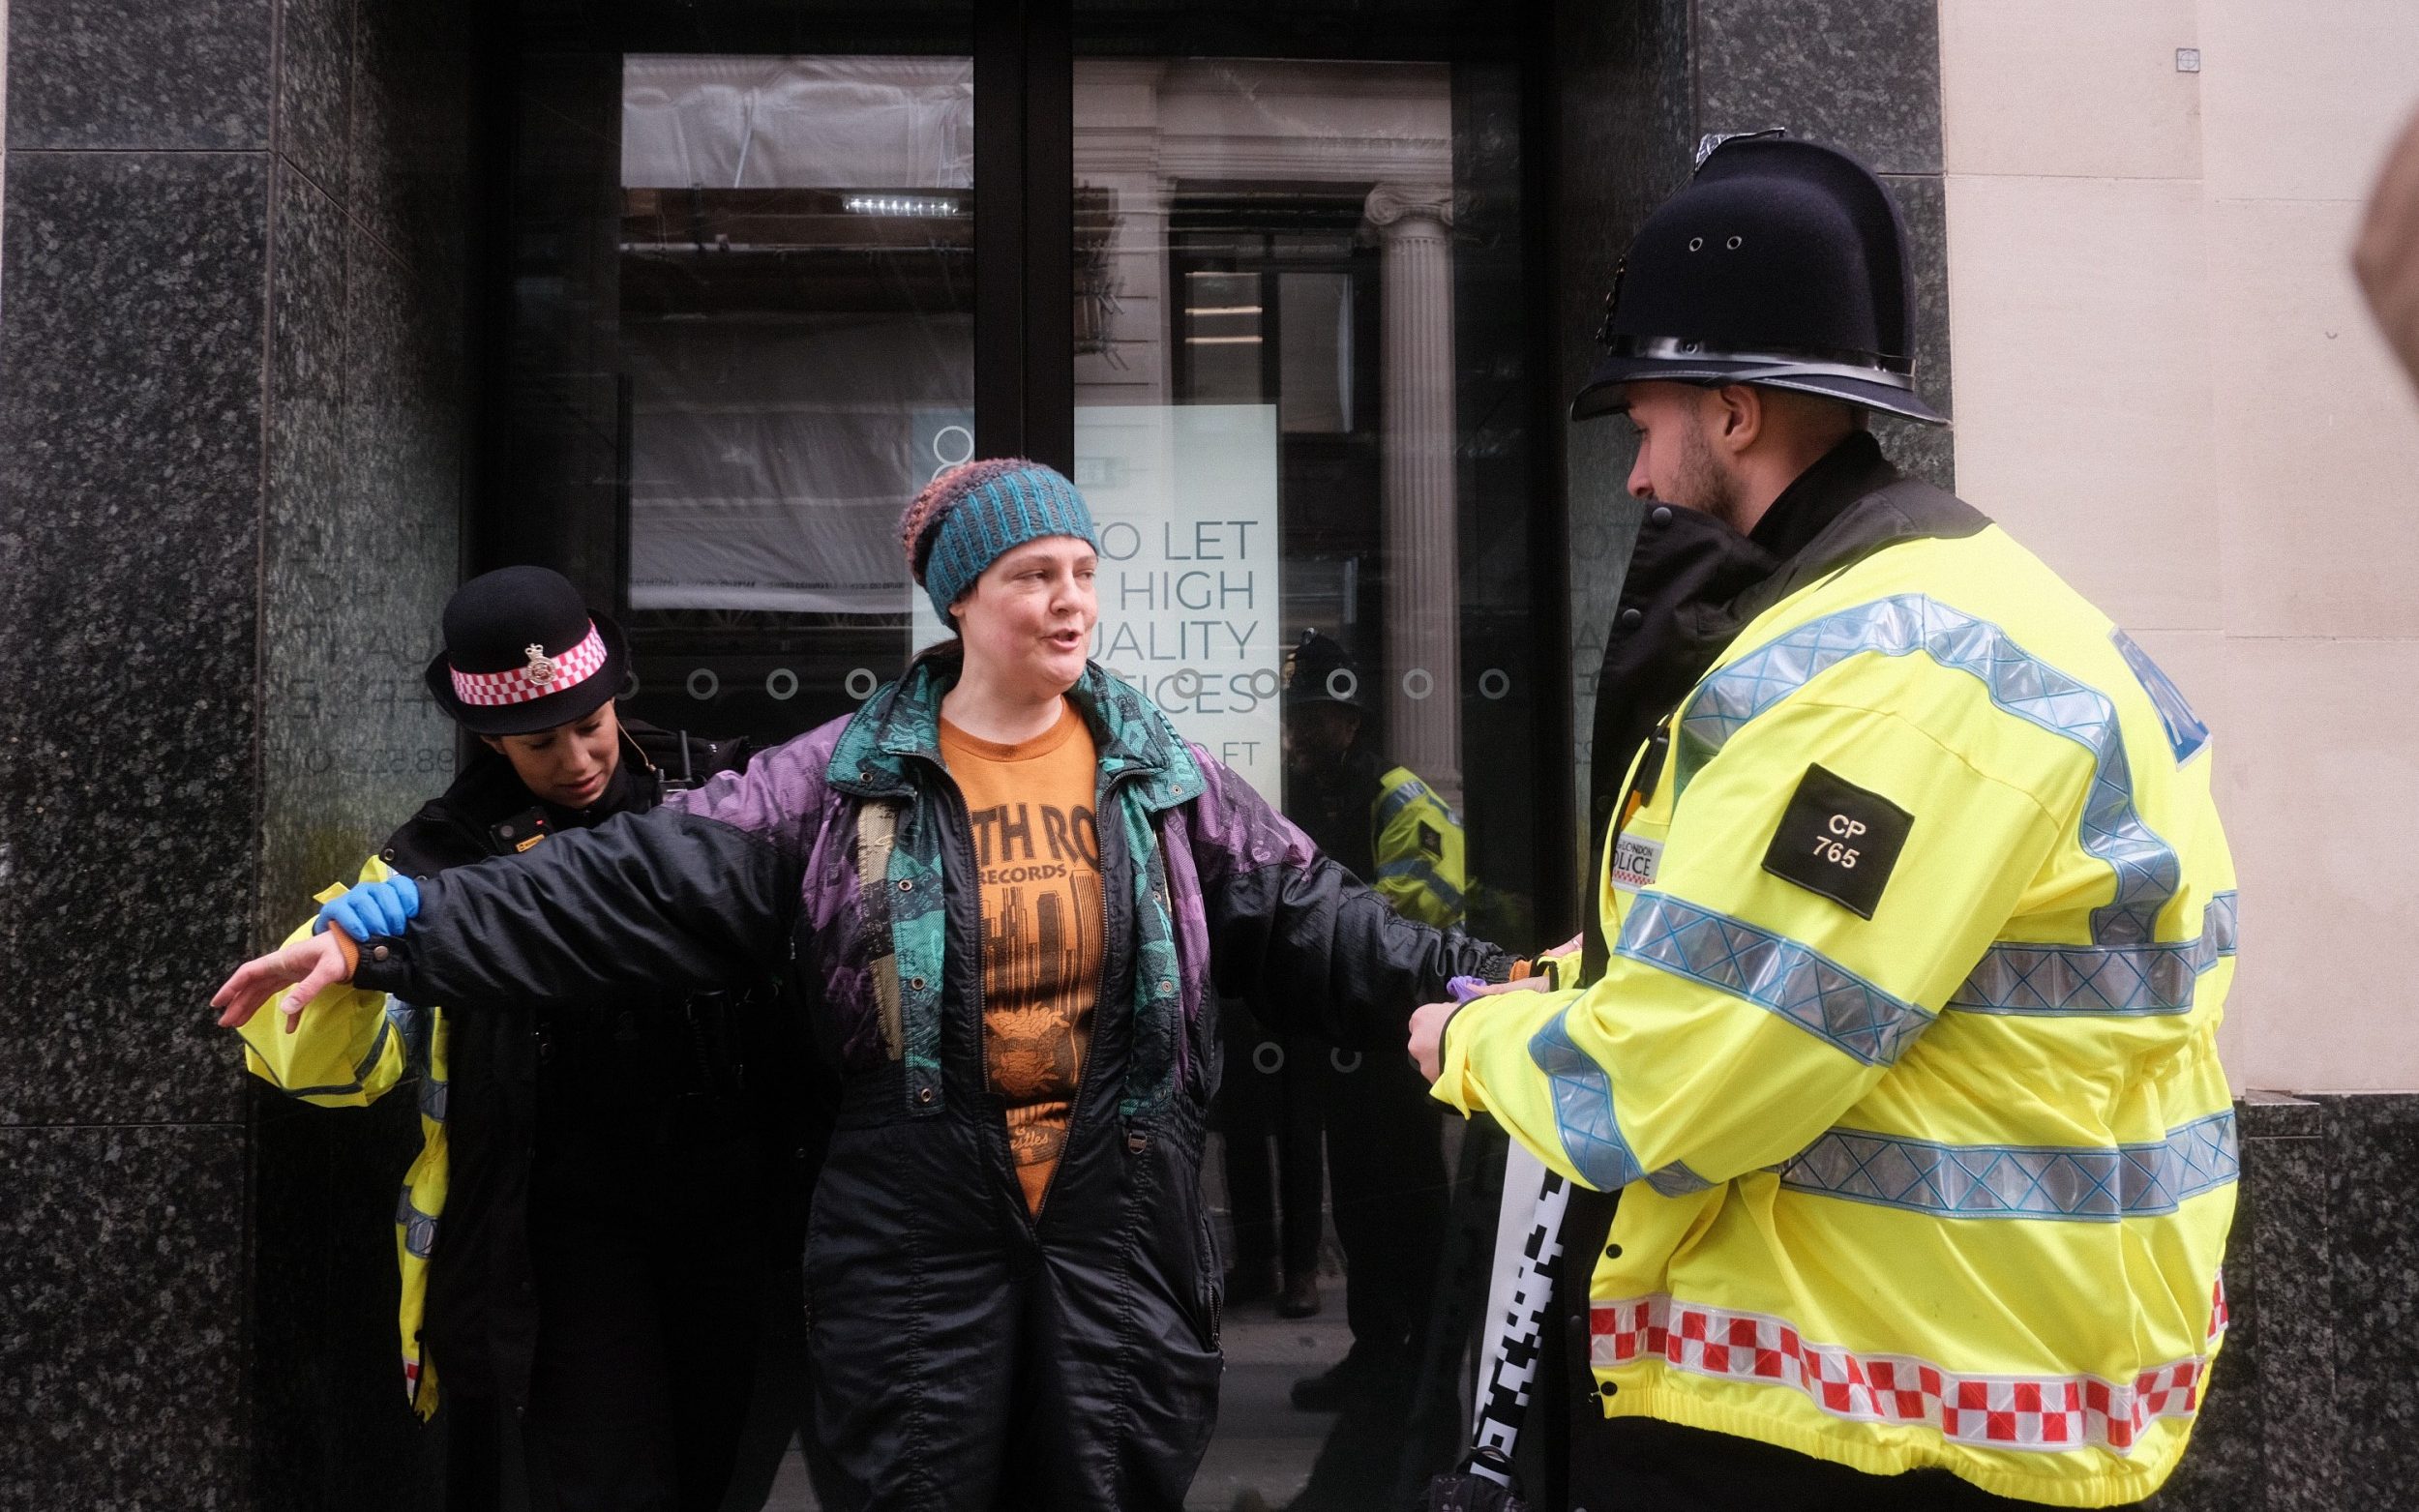 microsoft, extinction rebellion protesters storm walkie talkie dressed in suits